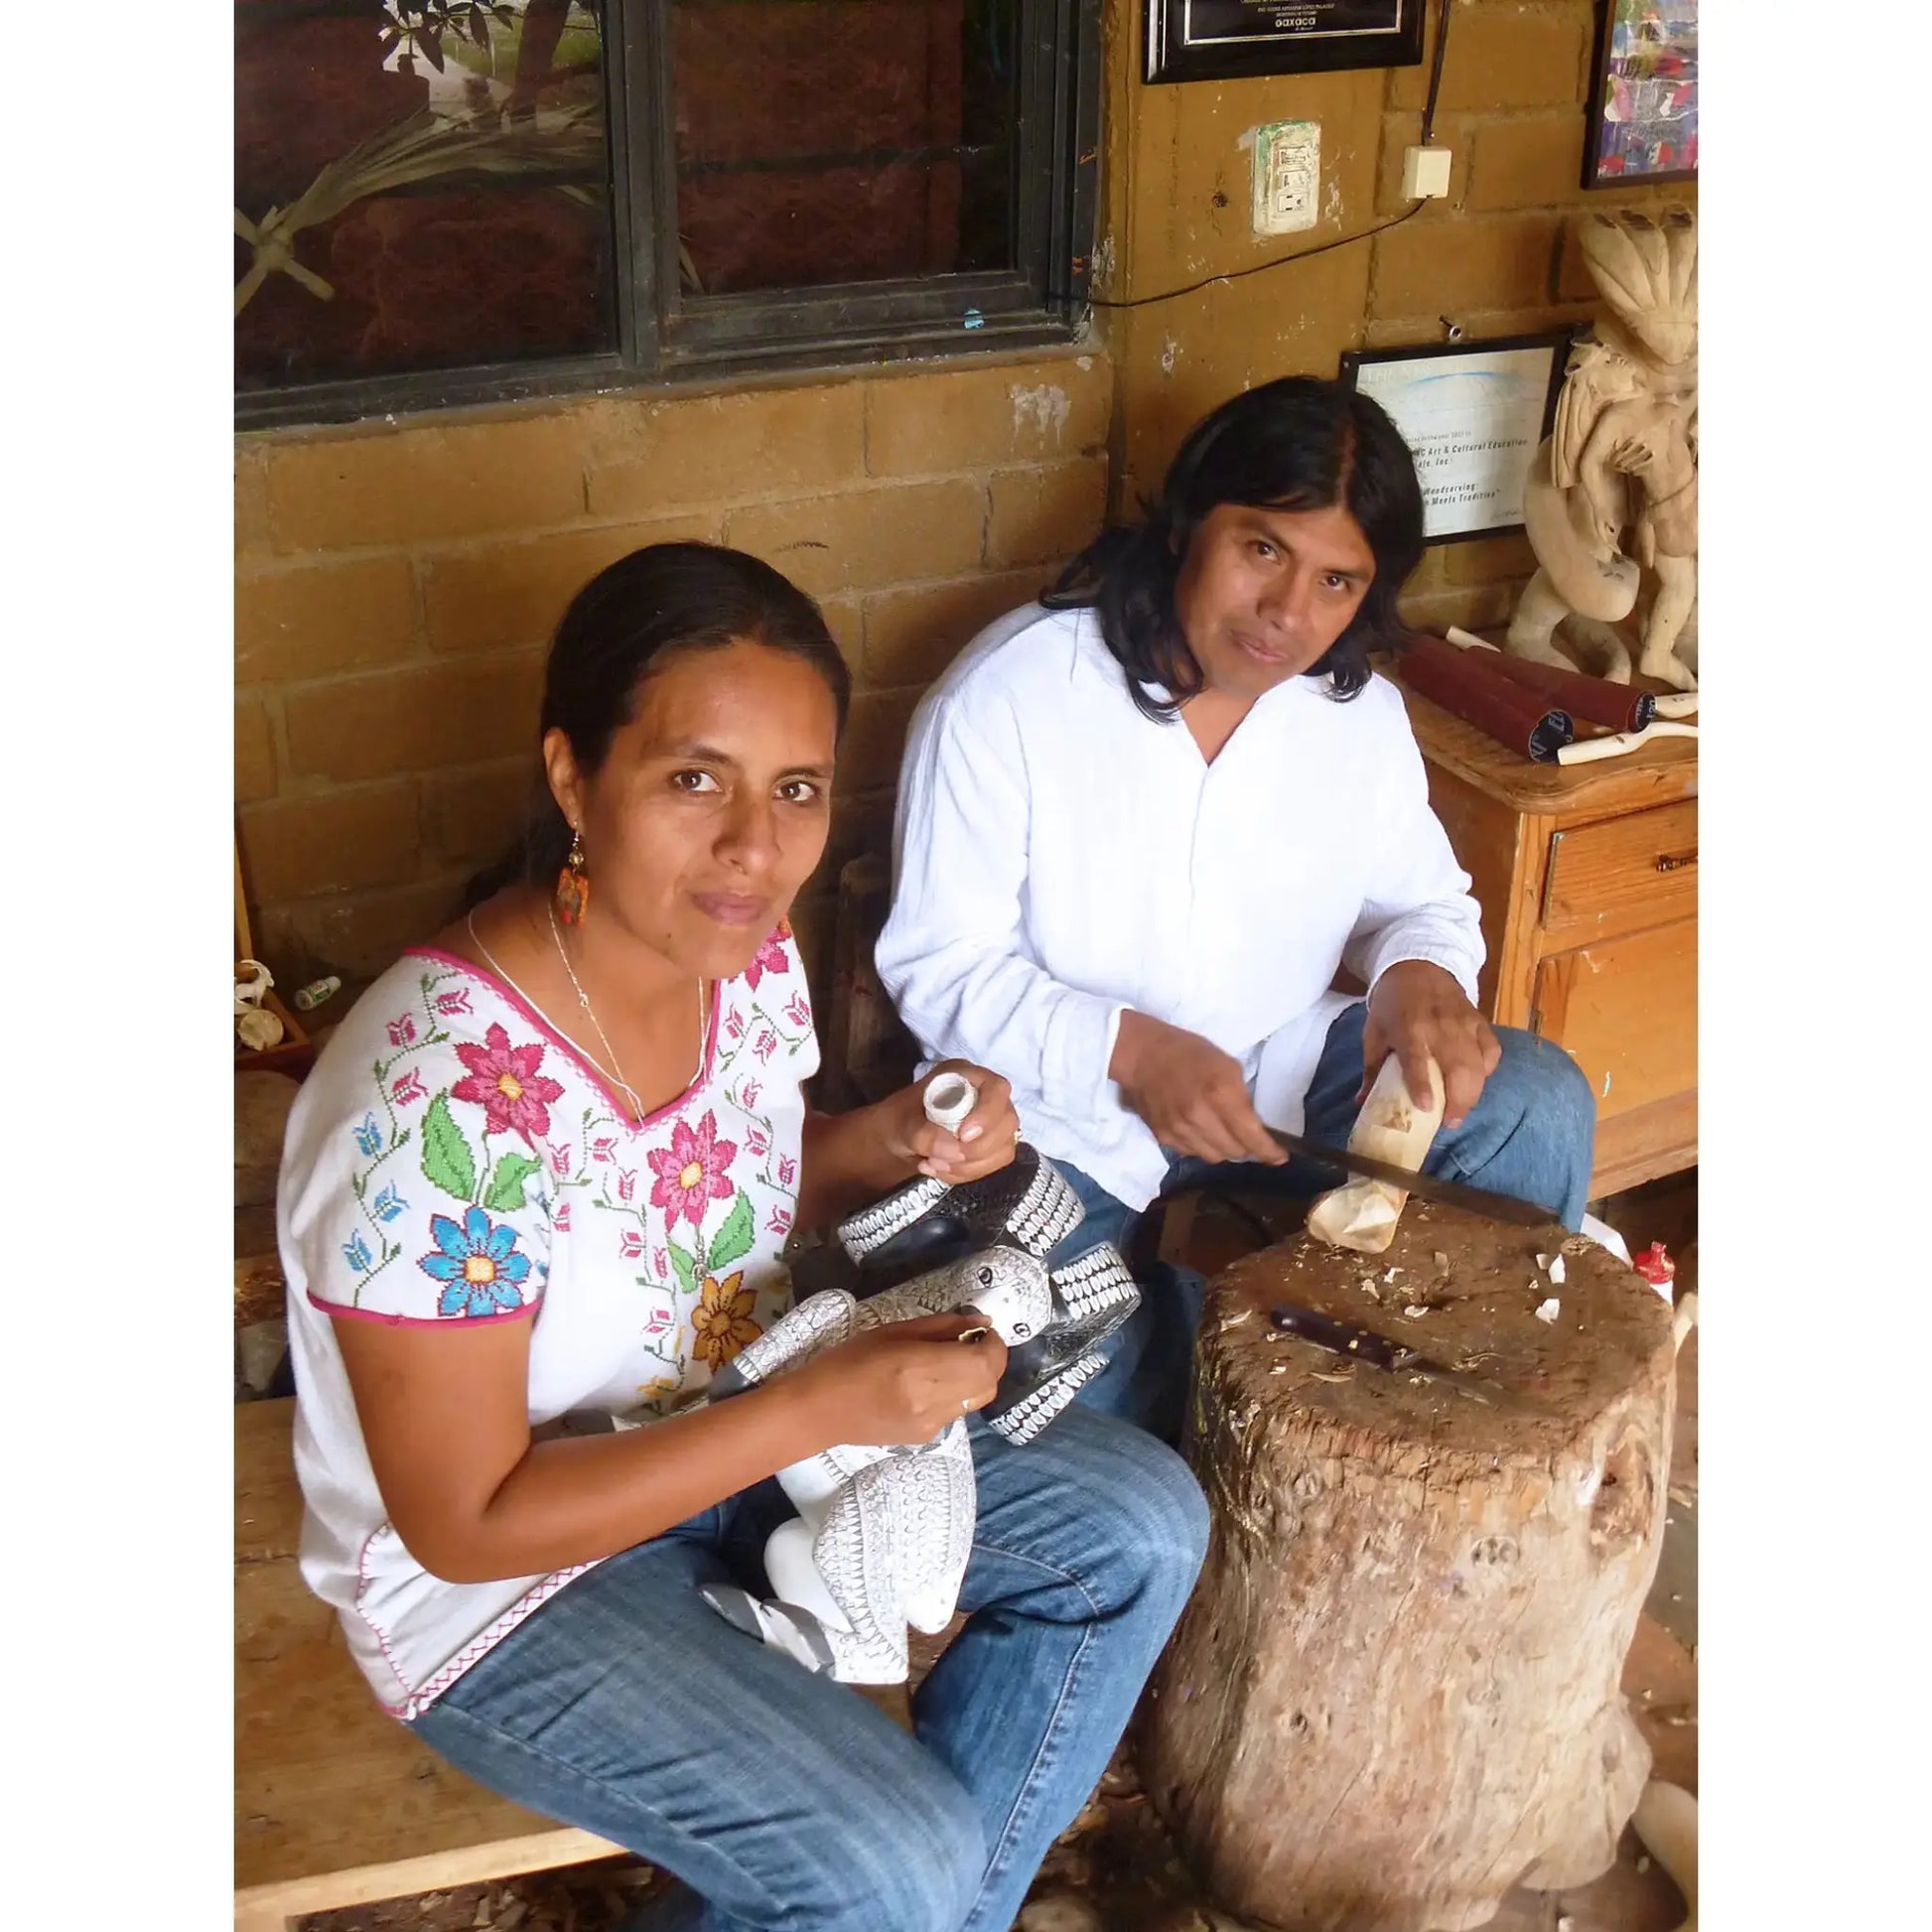 Artisan Handcrafted Goods From Oaxaca, Mexico